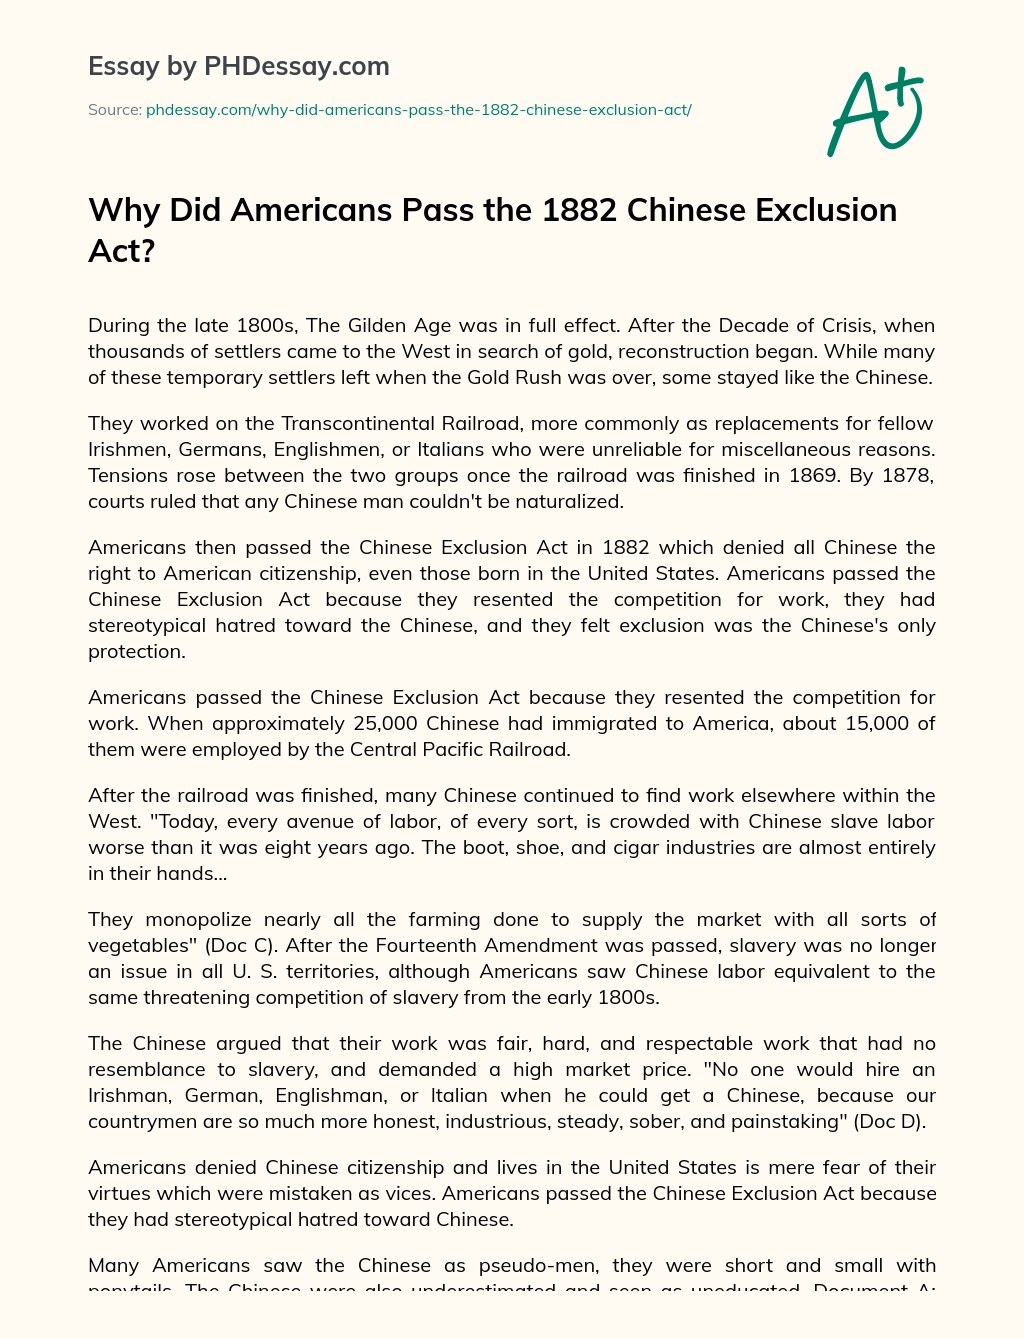 Why Did Americans Pass the 1882 Chinese Exclusion Act? essay